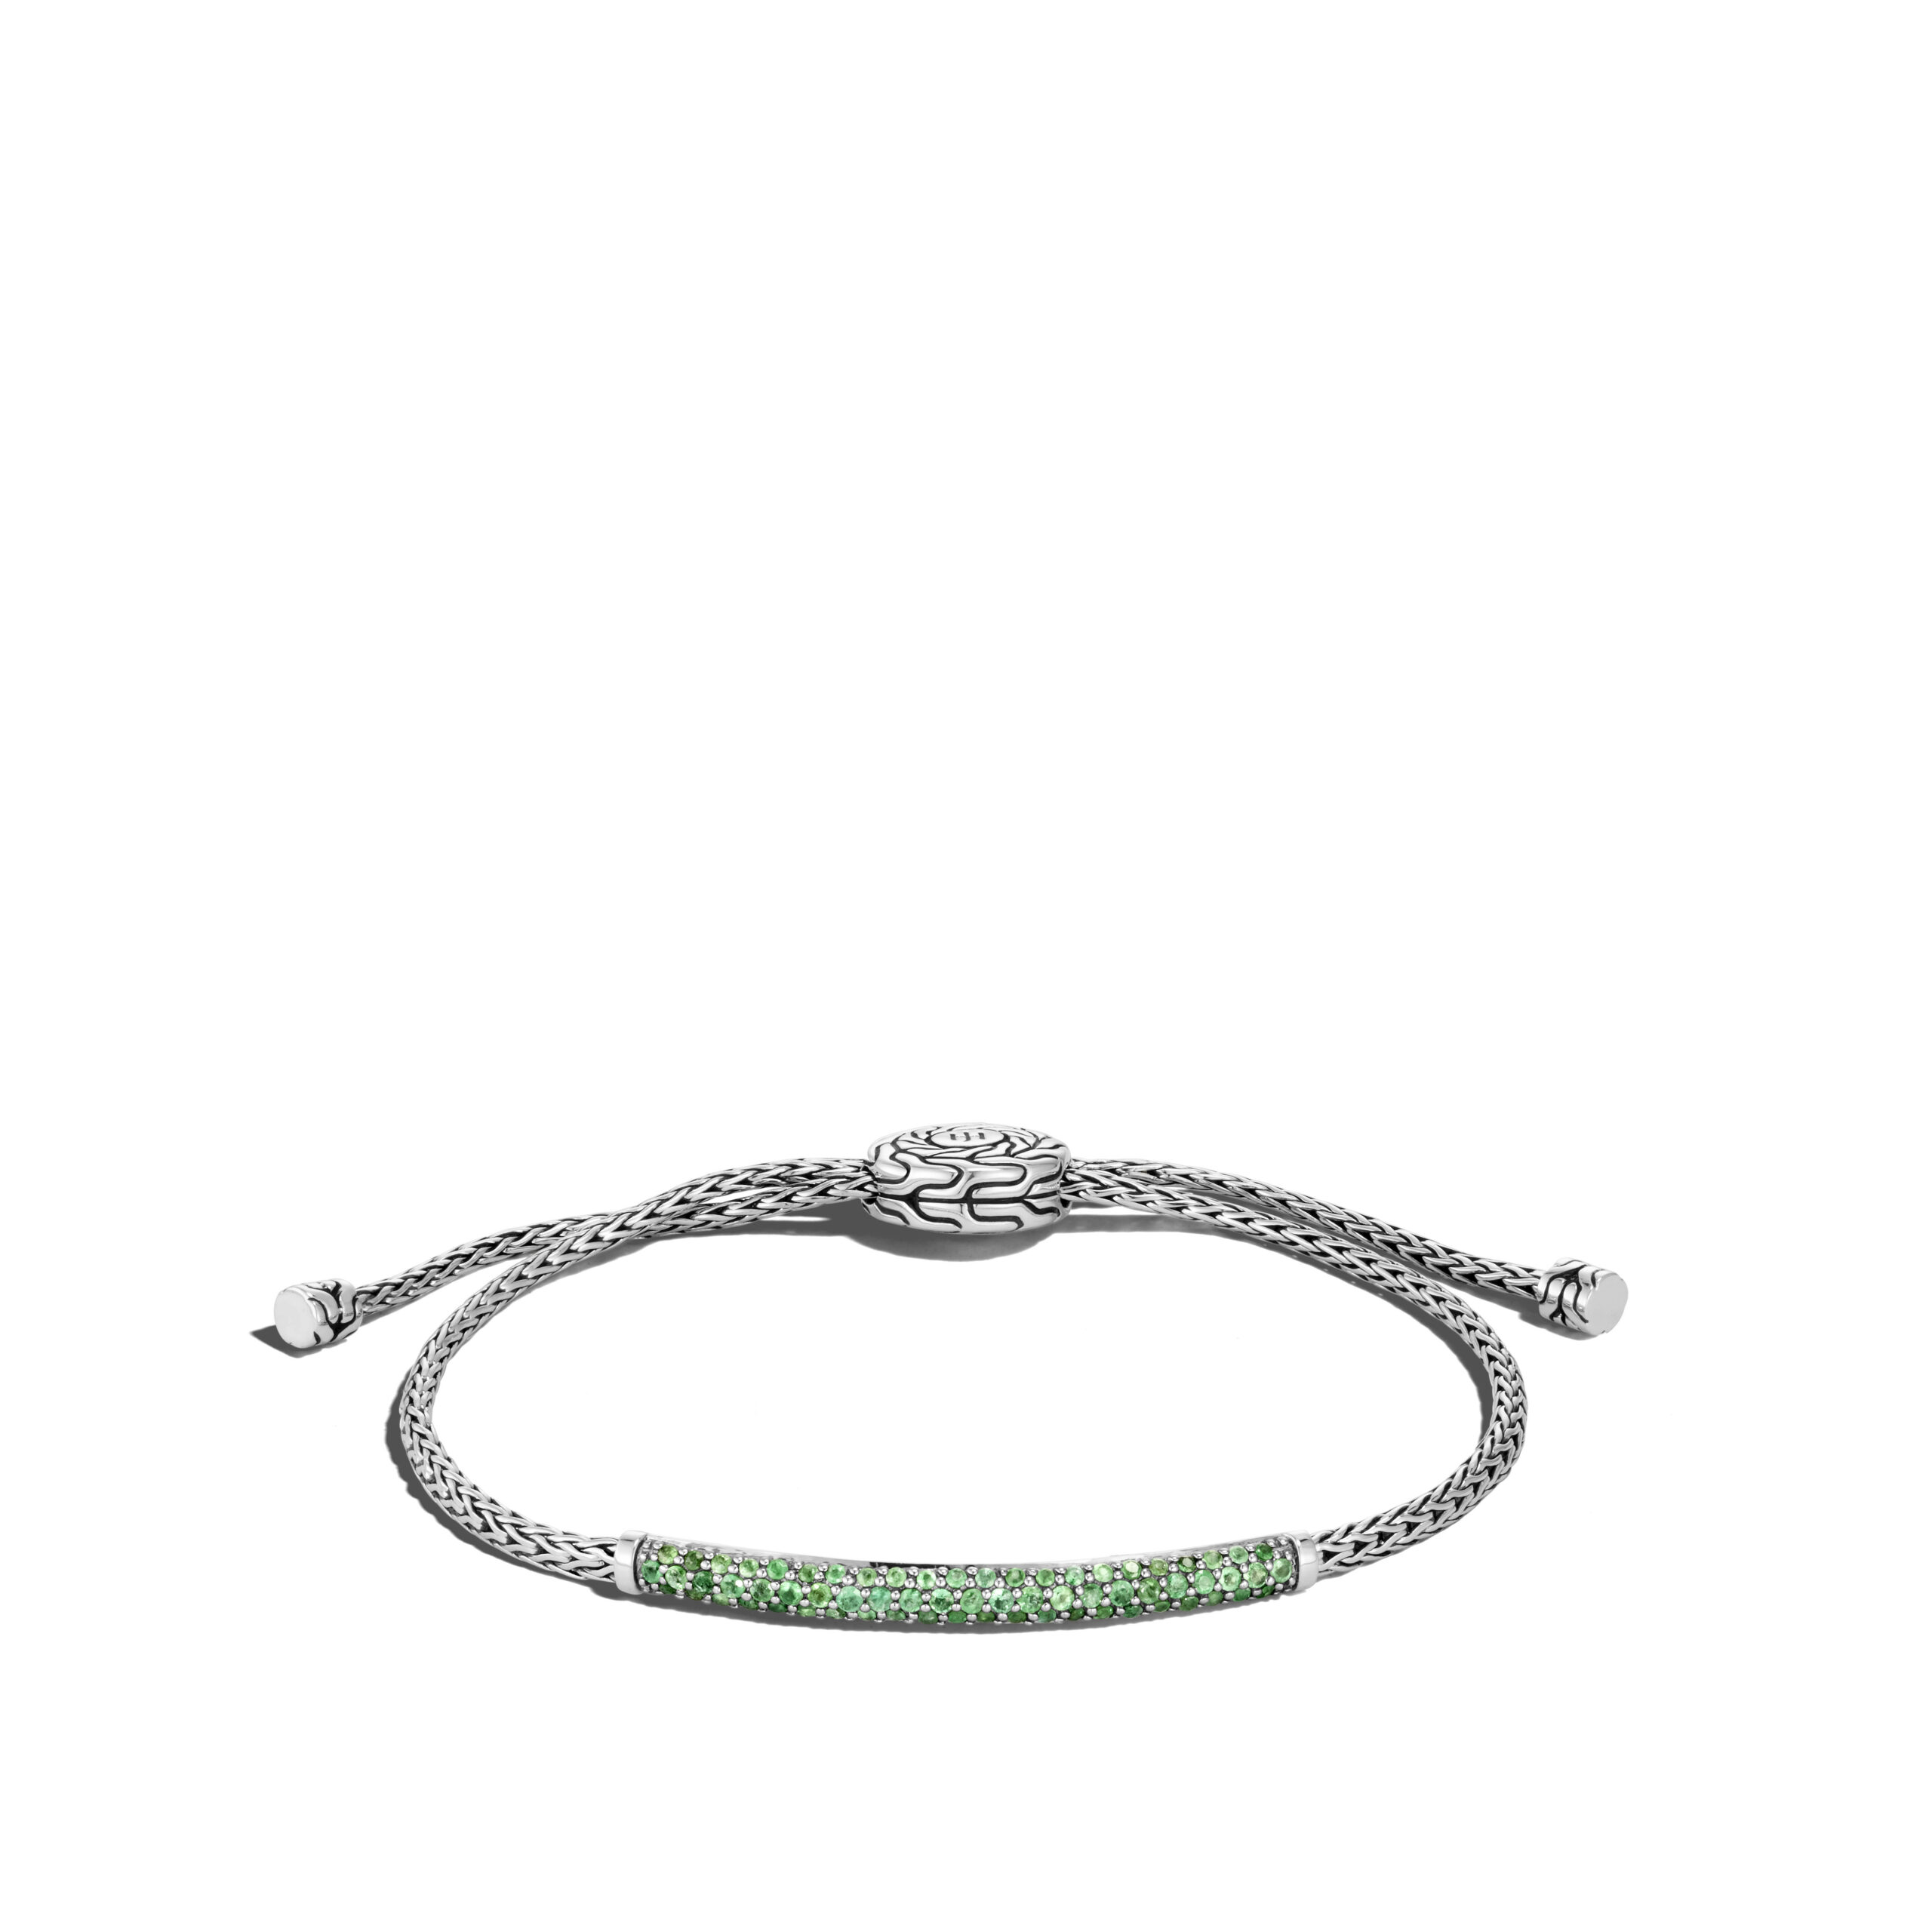 This bracelet by John Hardy is crafted from sterling silver and features emeralds.